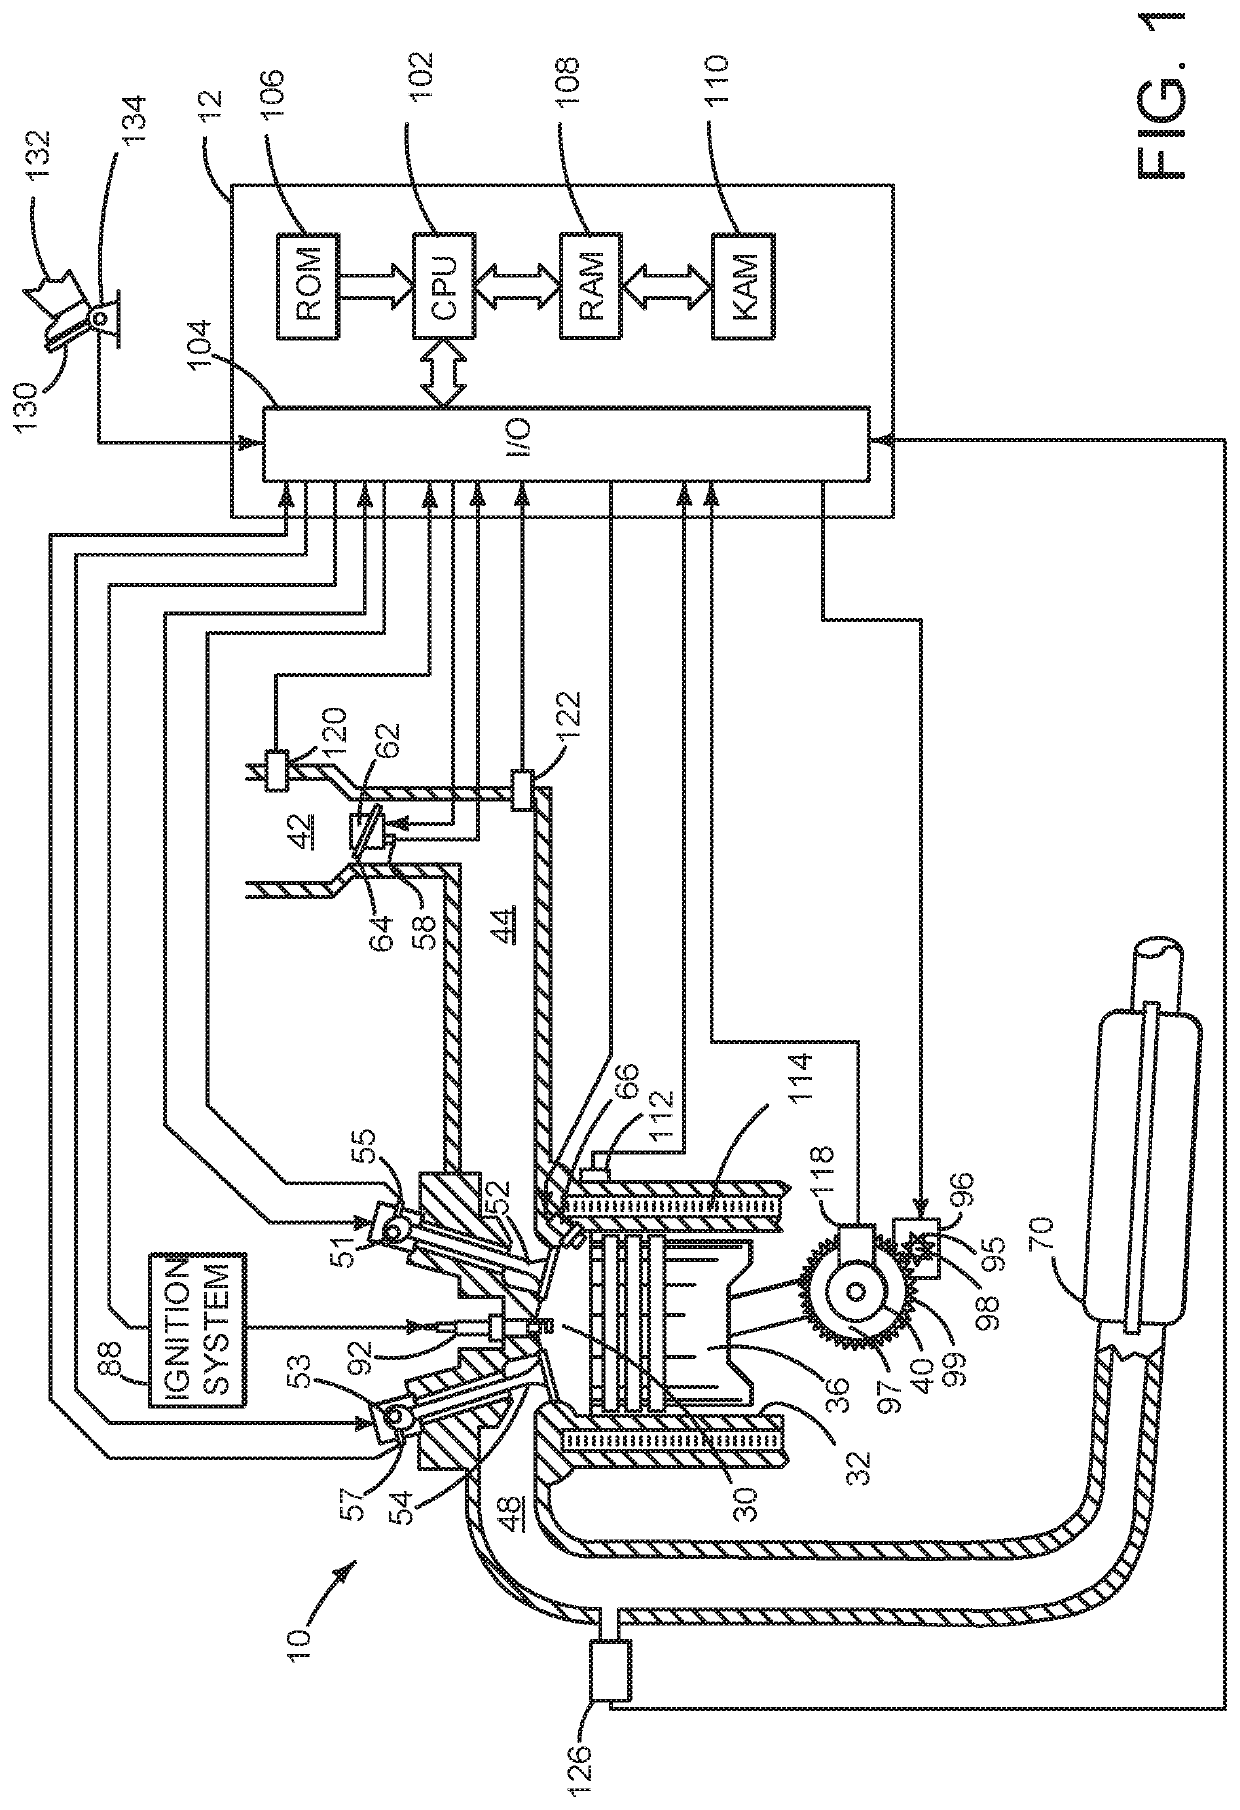 Systems and methods for operating a hybrid vehicle with a manual shift transmission